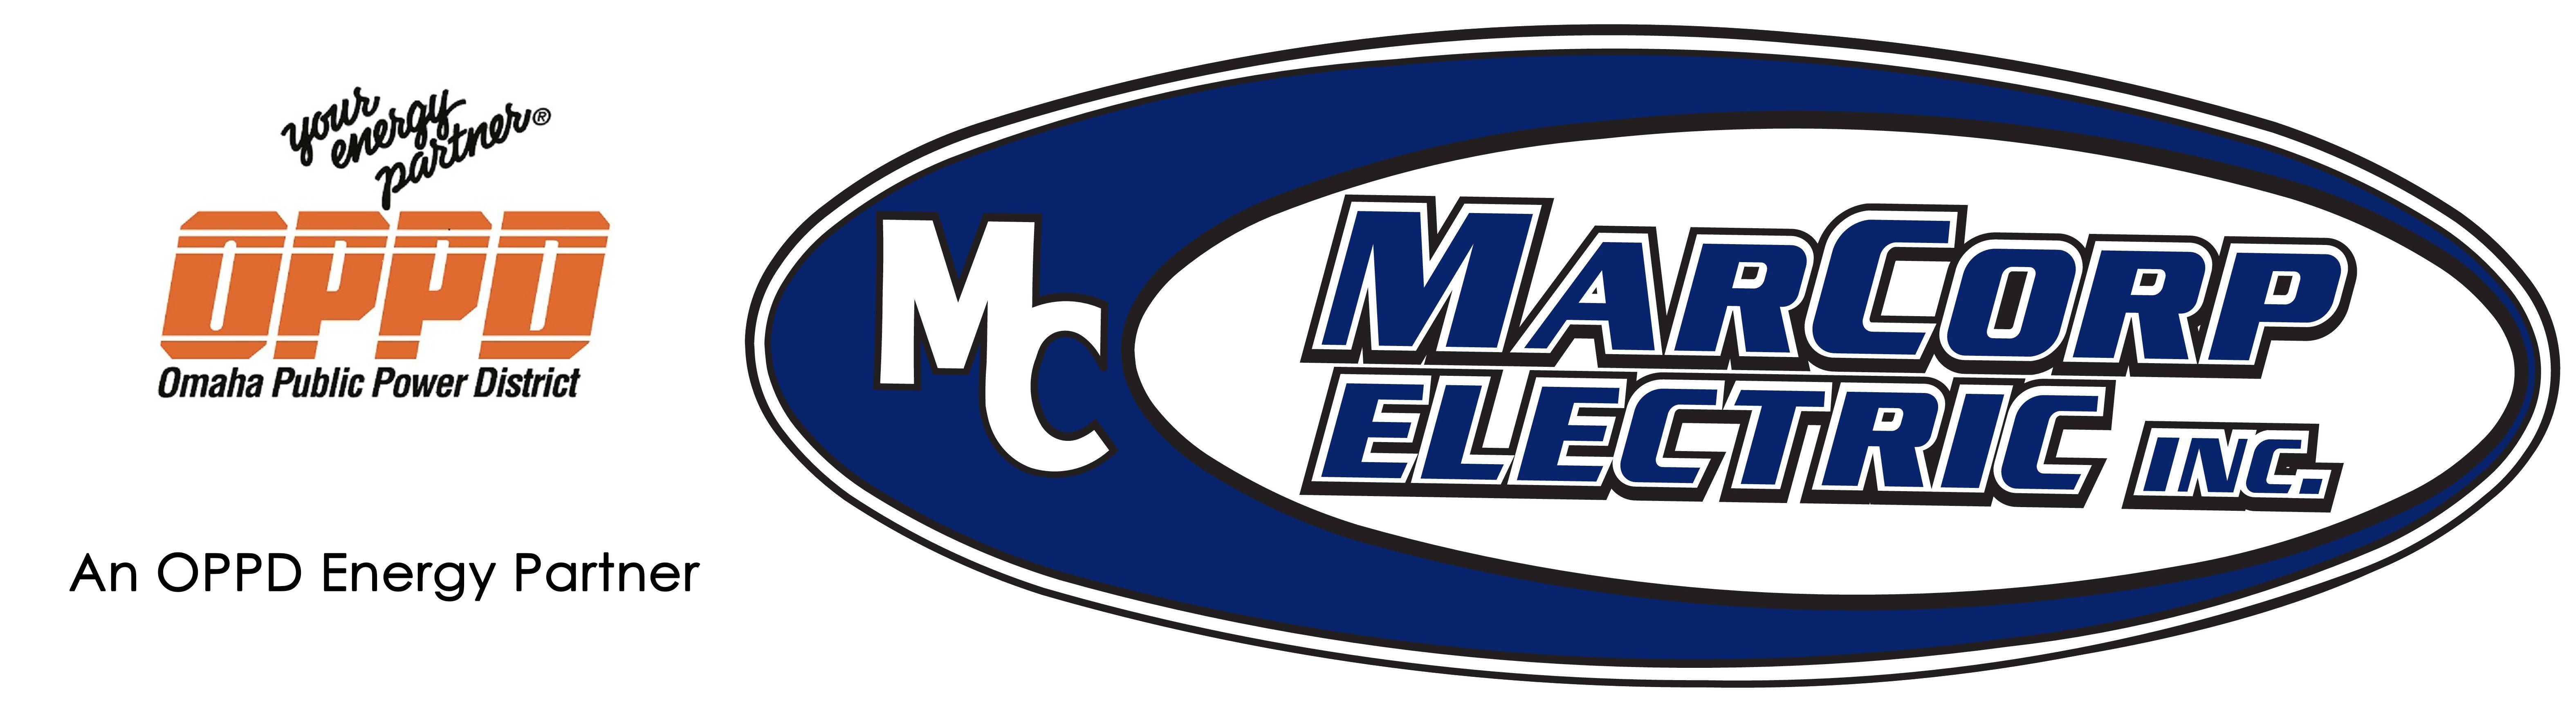 Commercial Electric Logo - MarCorp Electric | Commercial Electricians